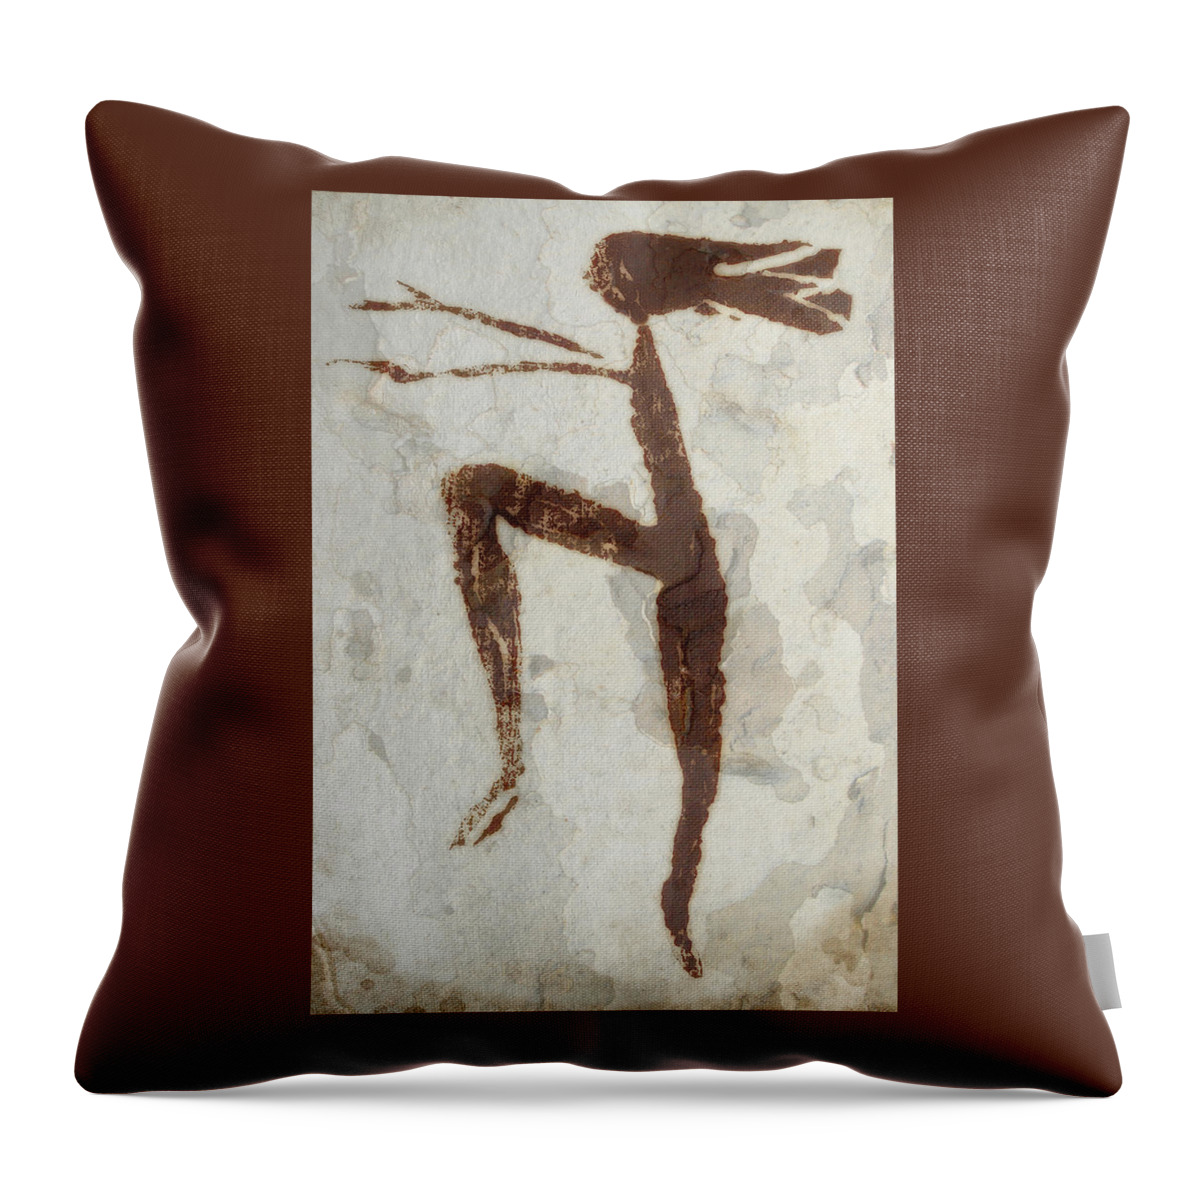 Shepherdess Throw Pillow featuring the mixed media Shepherdess by Kandy Hurley